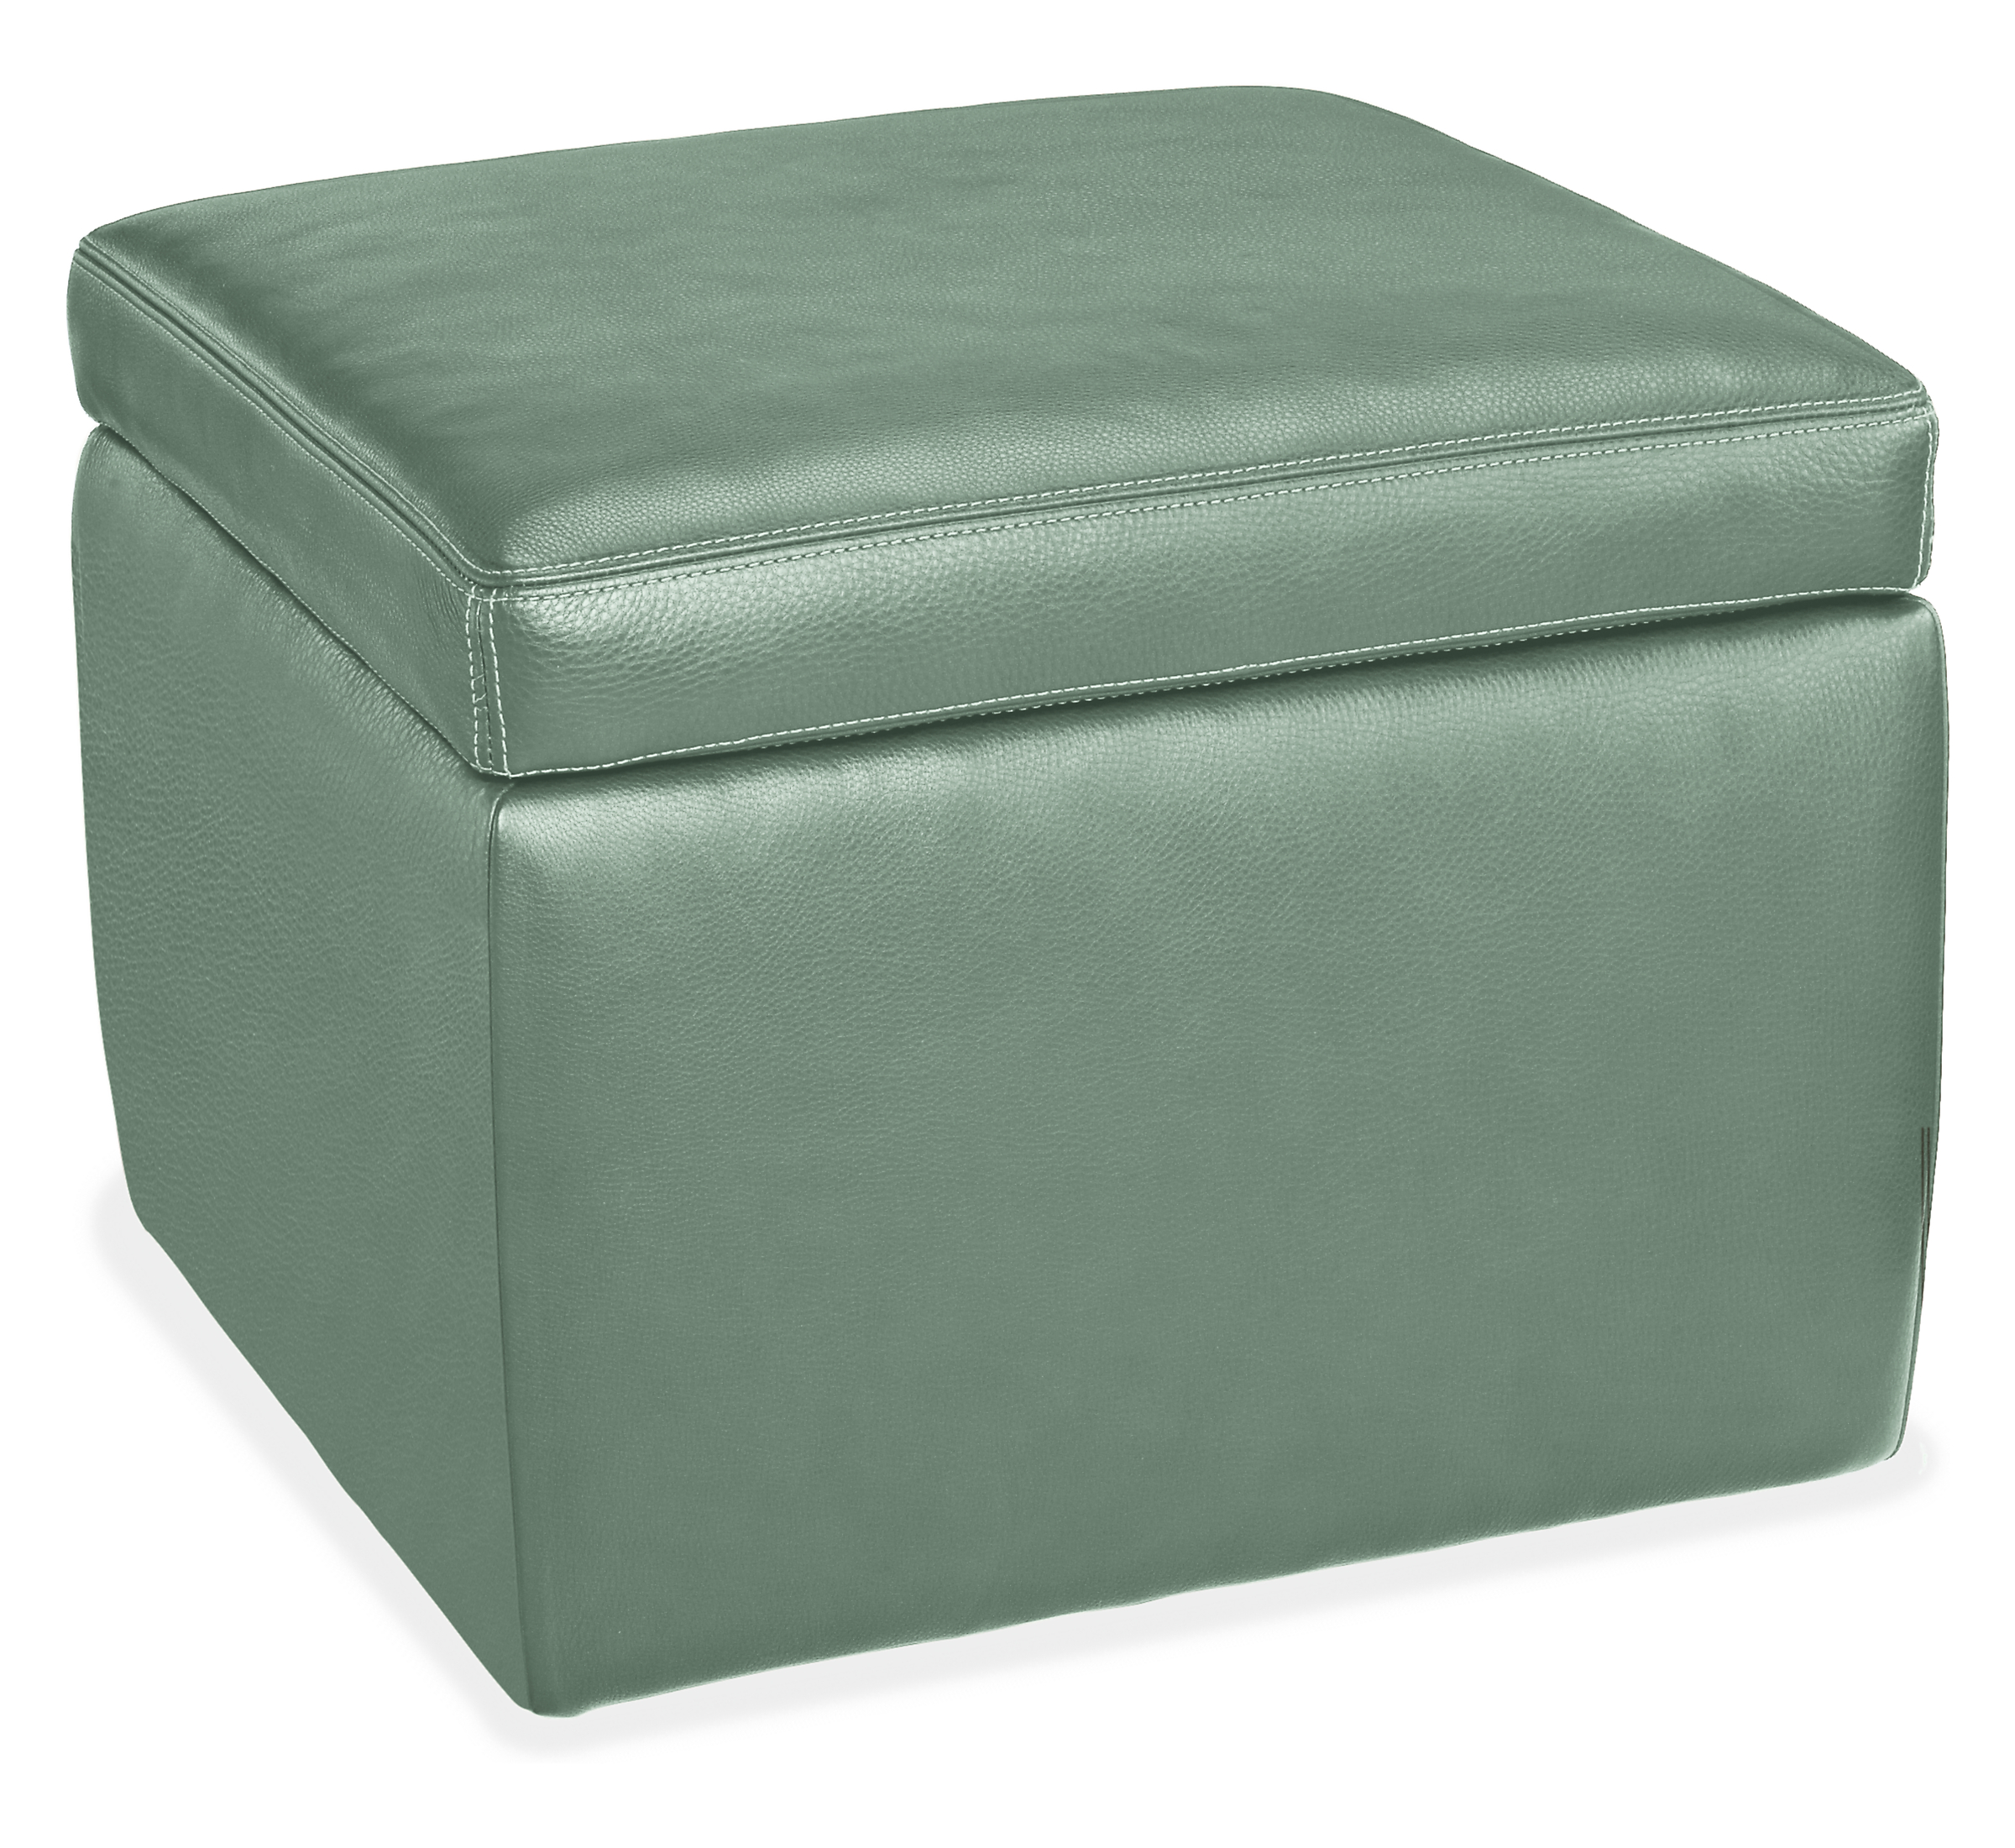 Tyler 21w 21d 17h Square Storage Ottoman in Vento Teal Leather